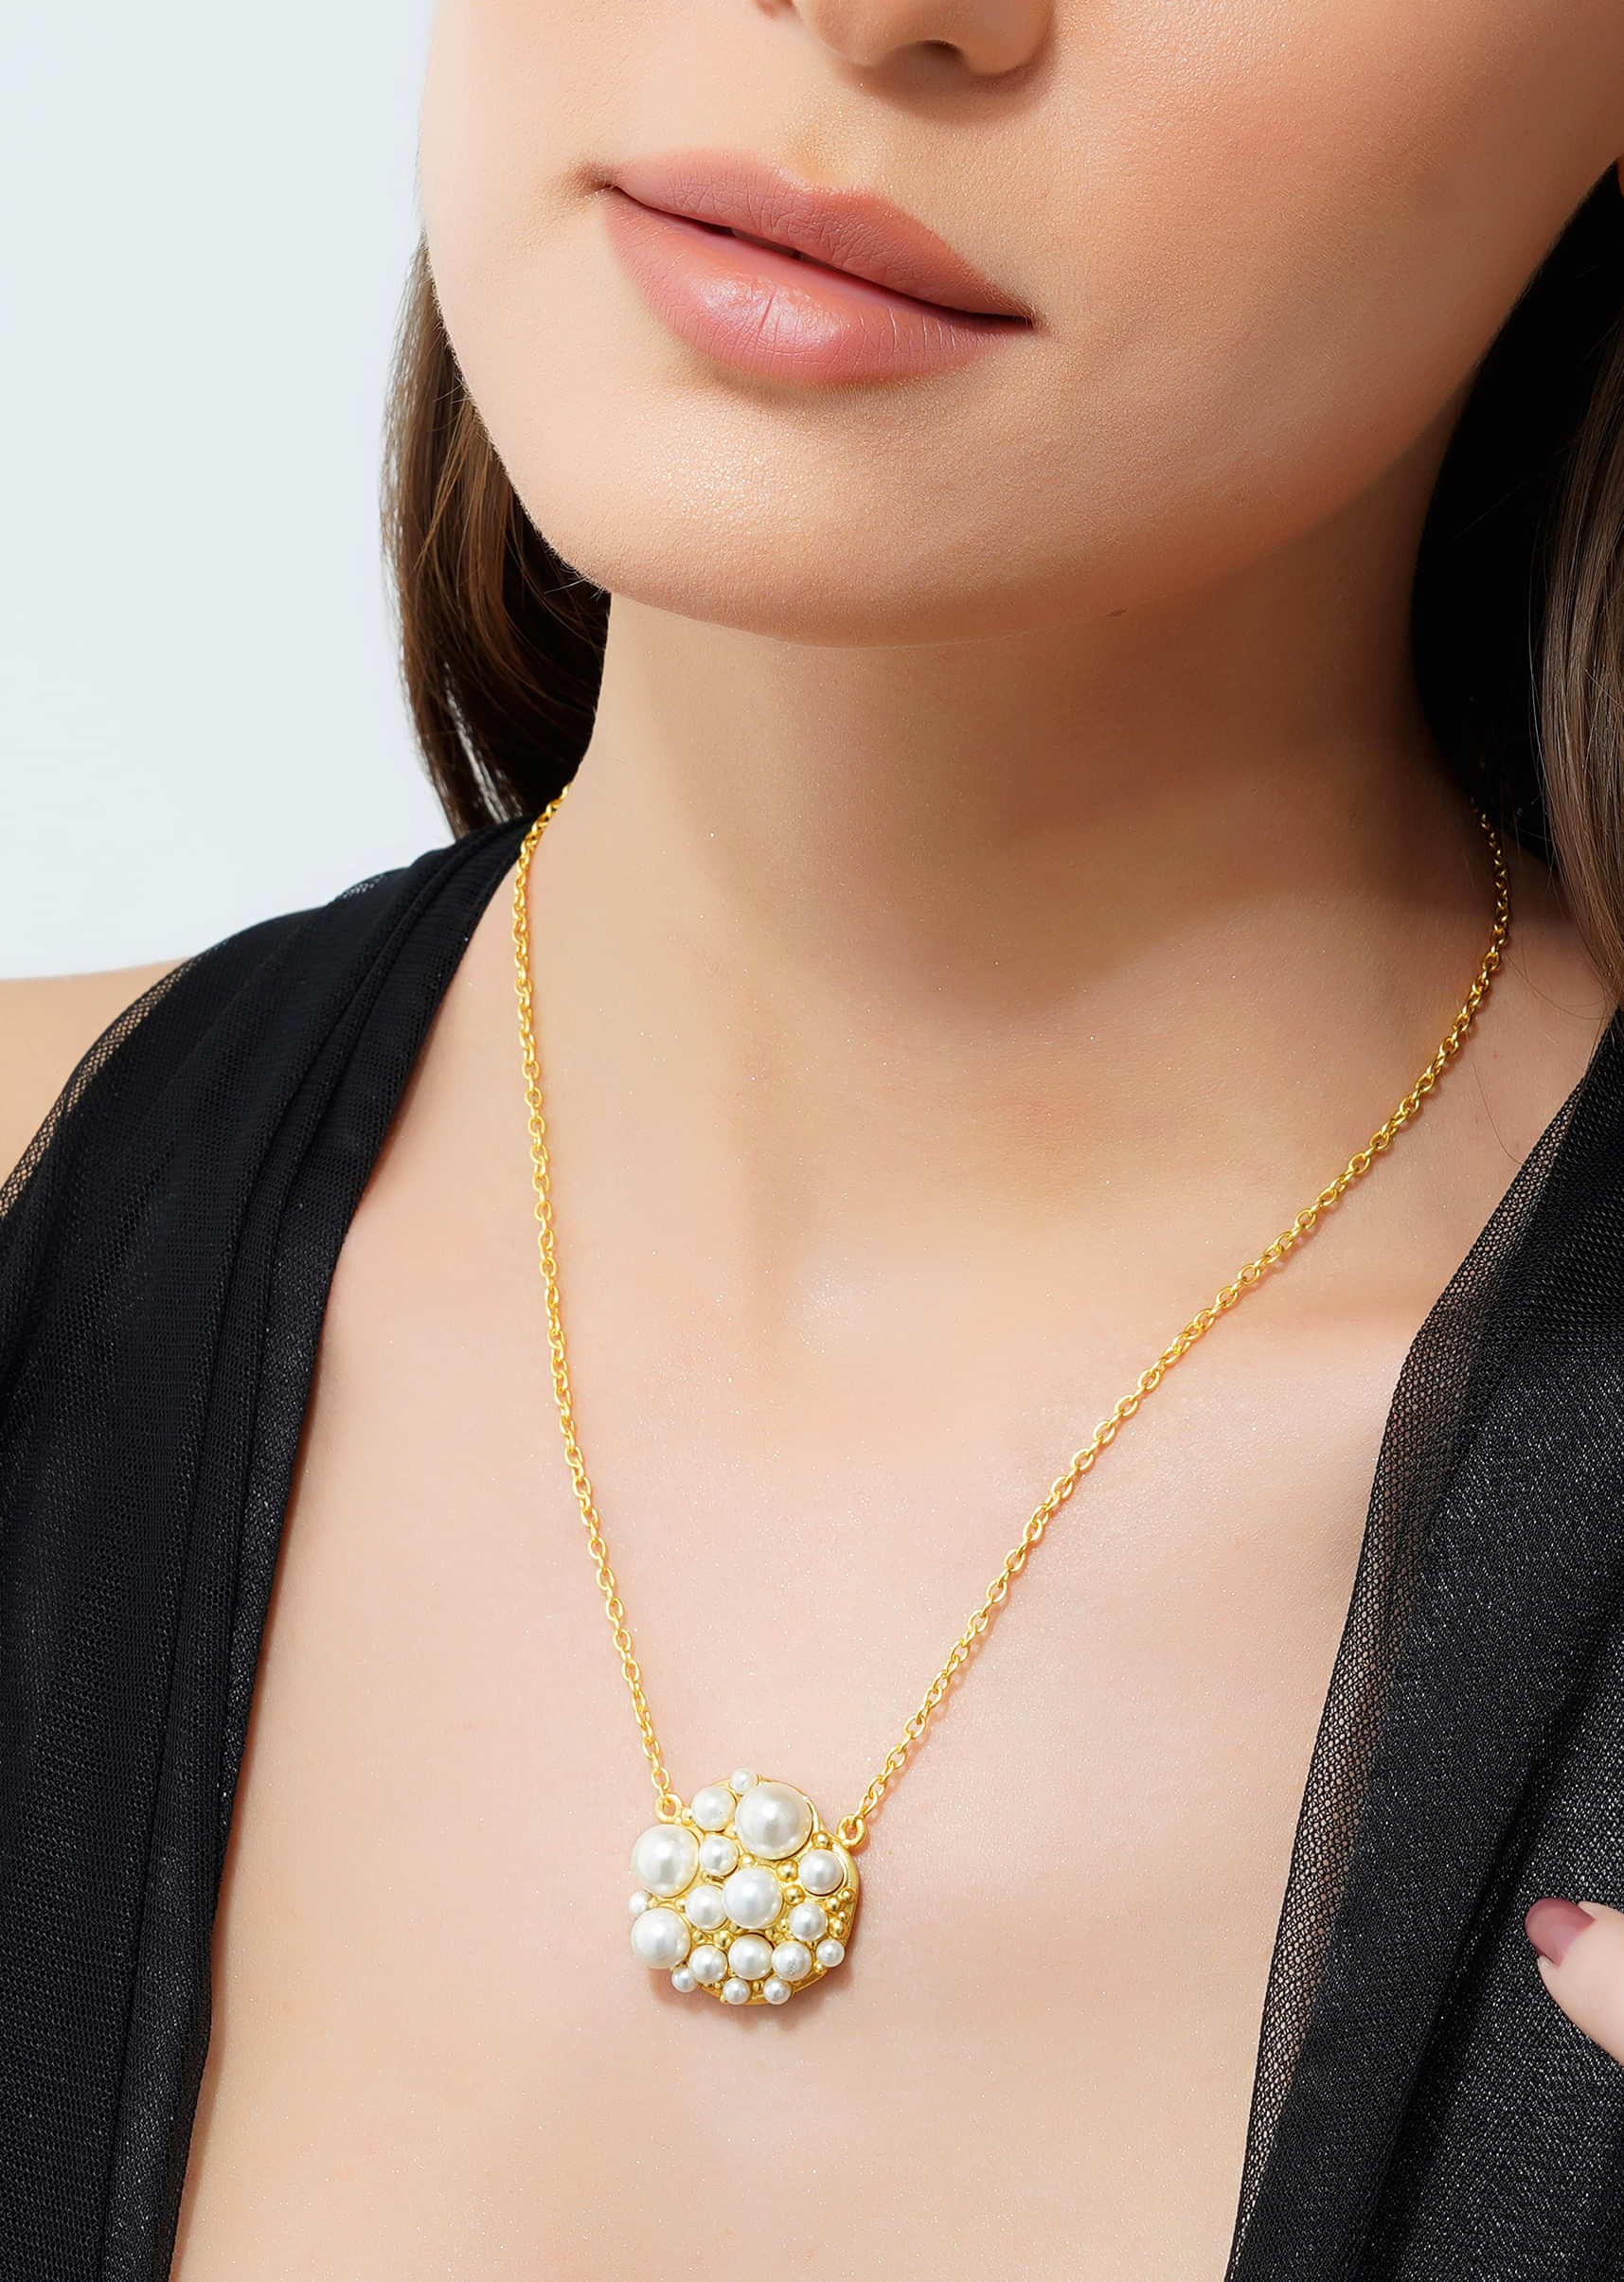 Gold 22K Pendant Necklace With White  Pearl Glam